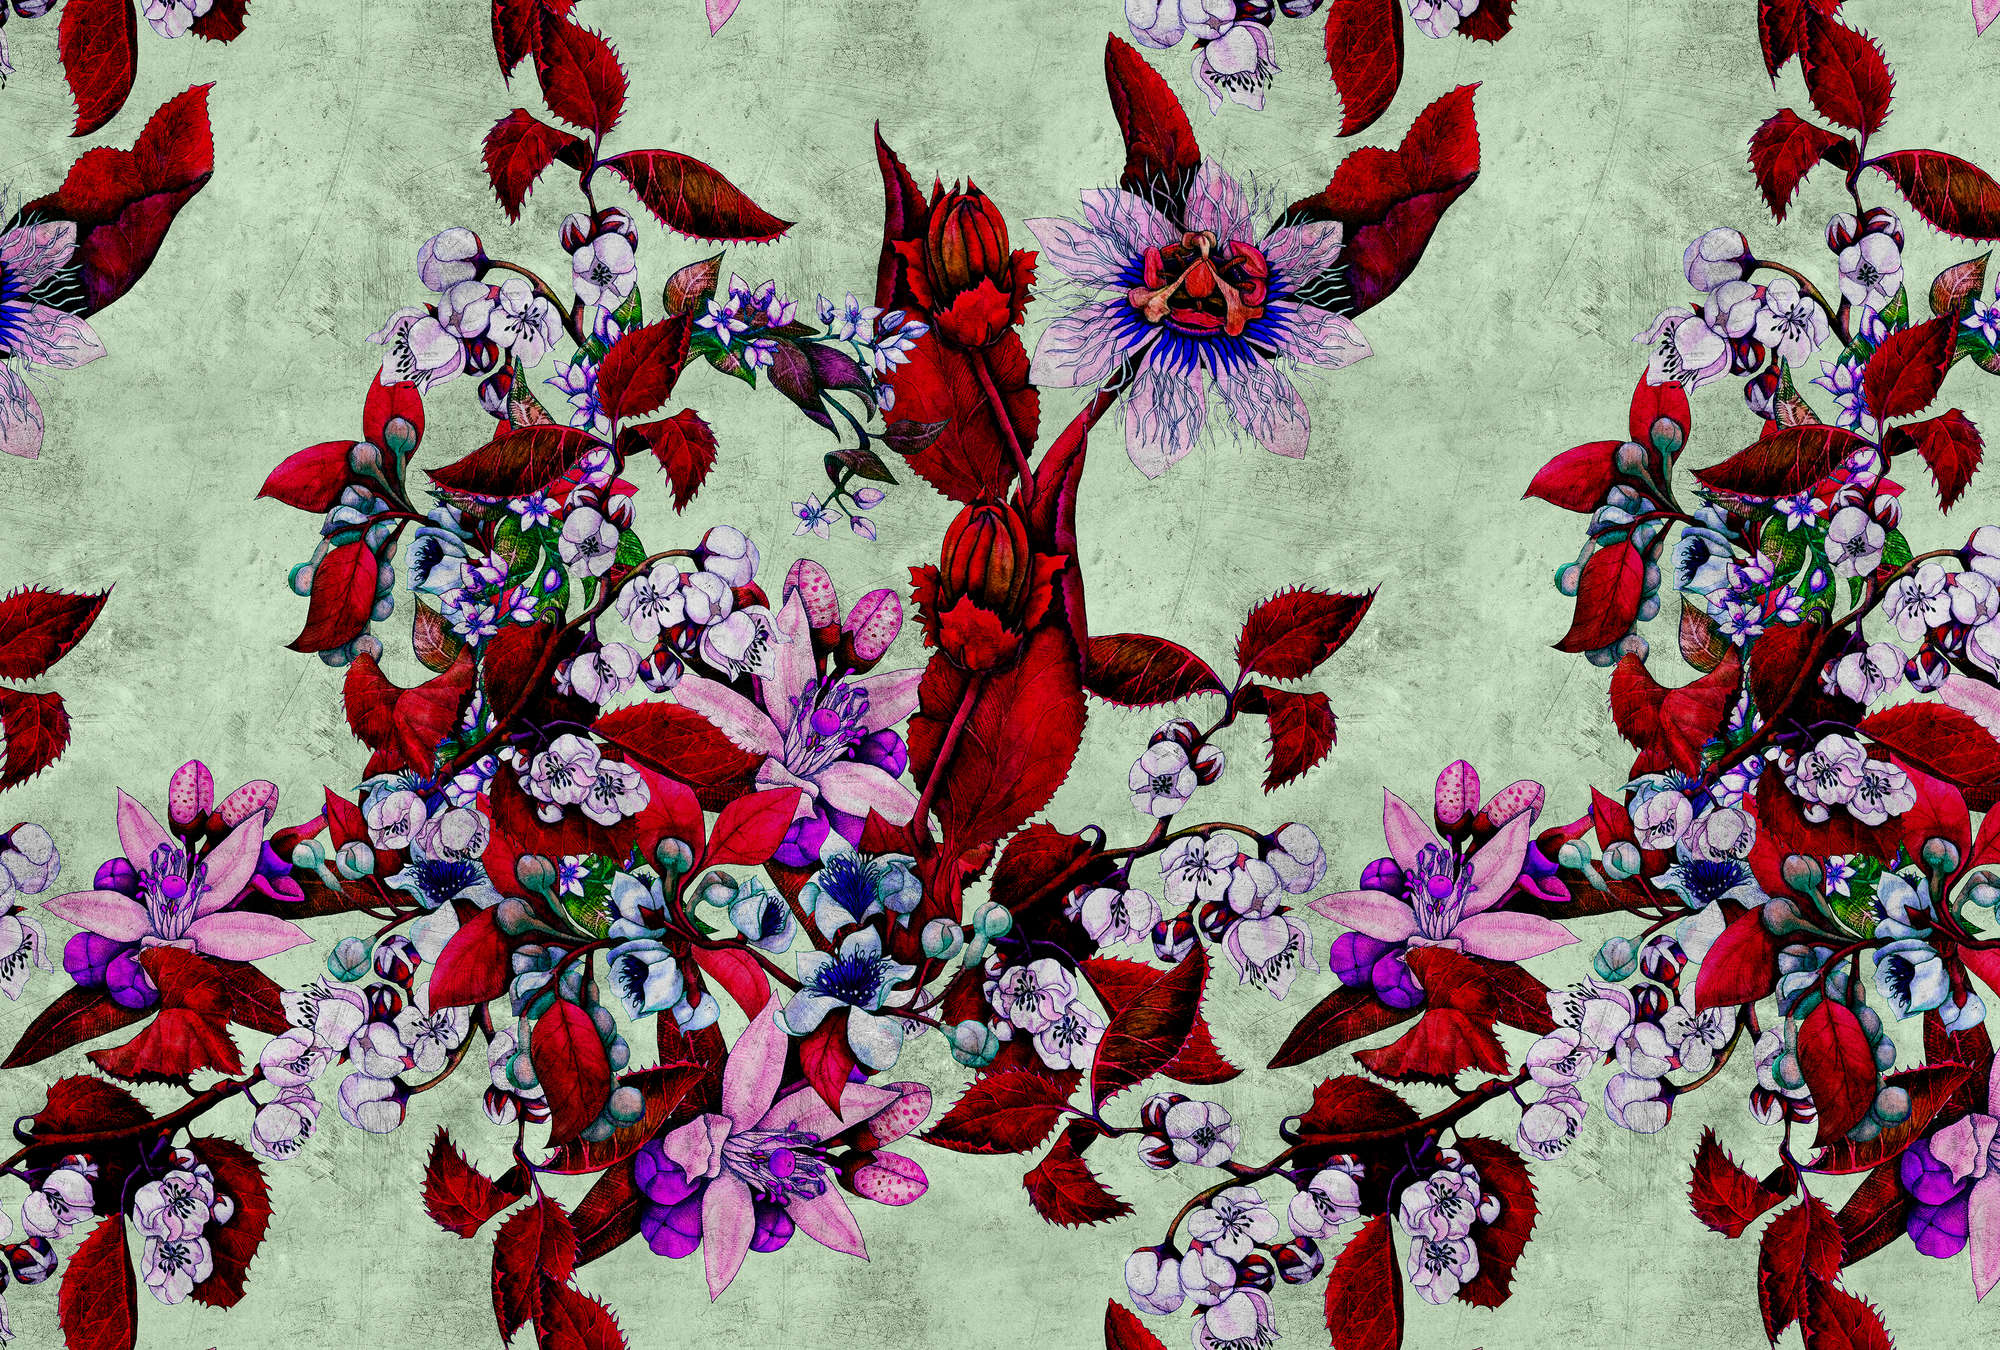             Tropical Passion 3 - Photo wallpaper with playful floral design - scratch texture - Green, Red | Matt smooth non-woven
        